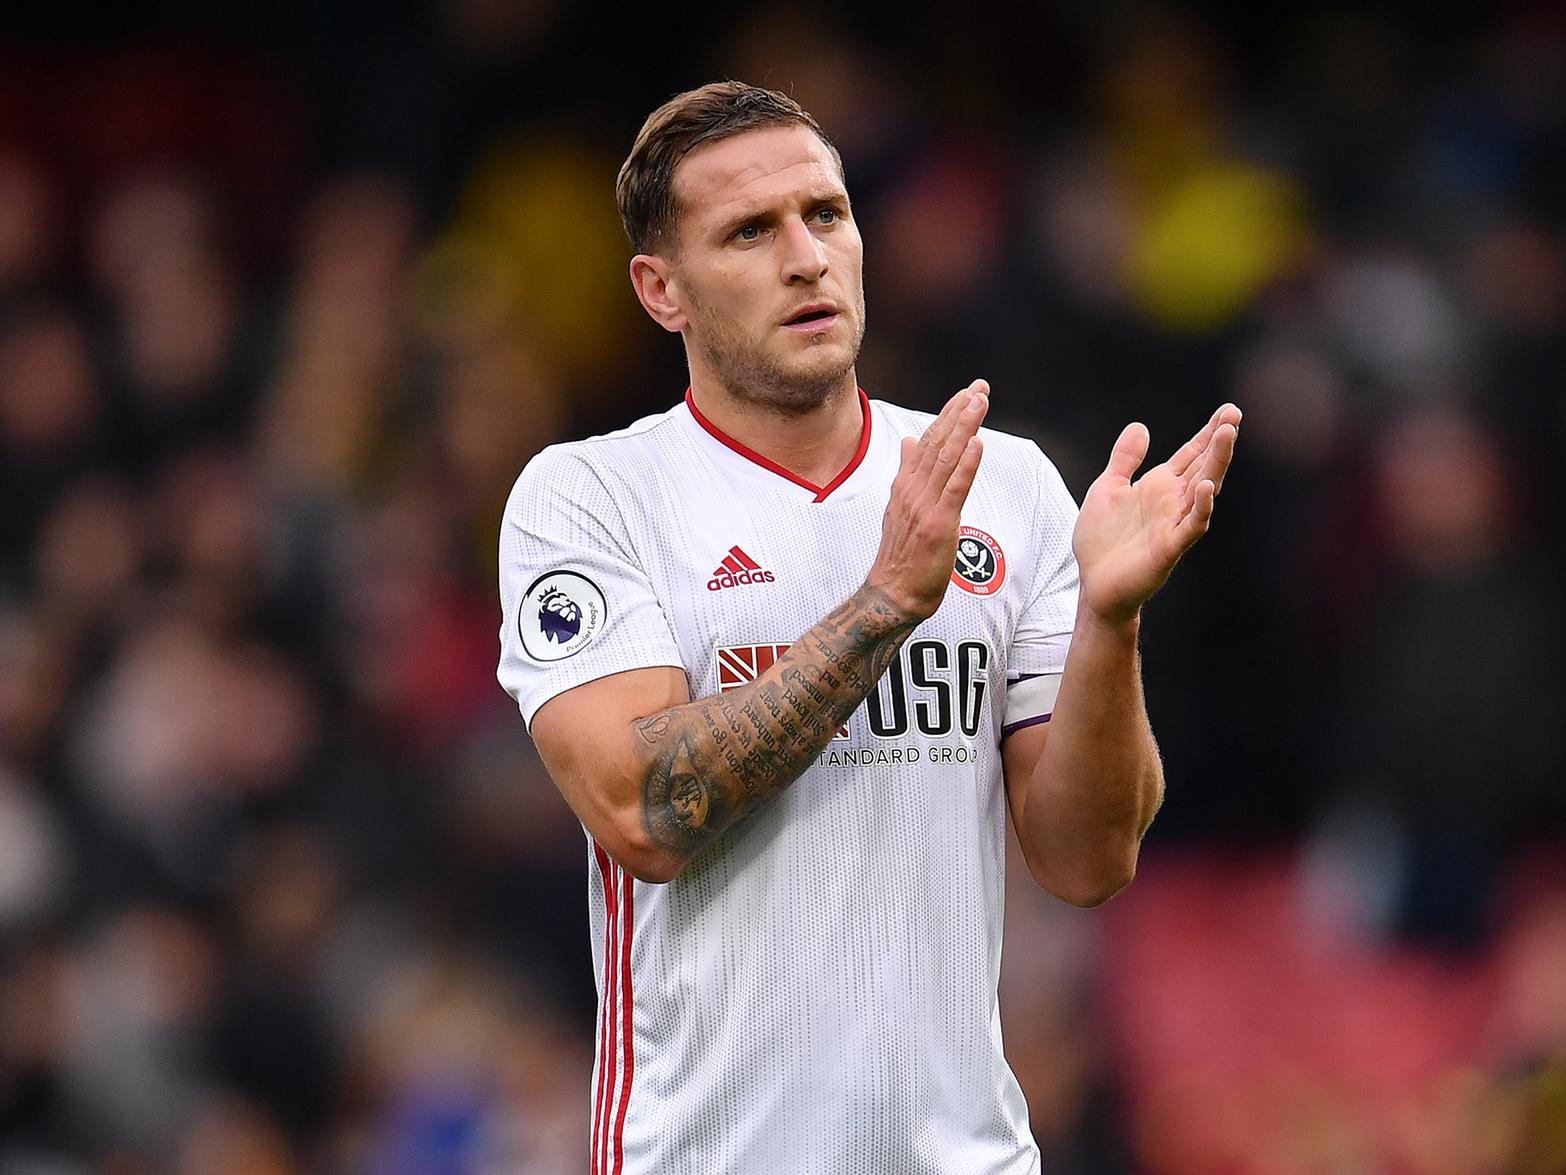 Celtic have become the bookies' new 2/1 favourites to sign Sheffield United striker Billy Sharp ahead of Leeds United, but it is yet to be seen whether the player will opt for a move away from Bramall Lane in January. (Sky Bet)